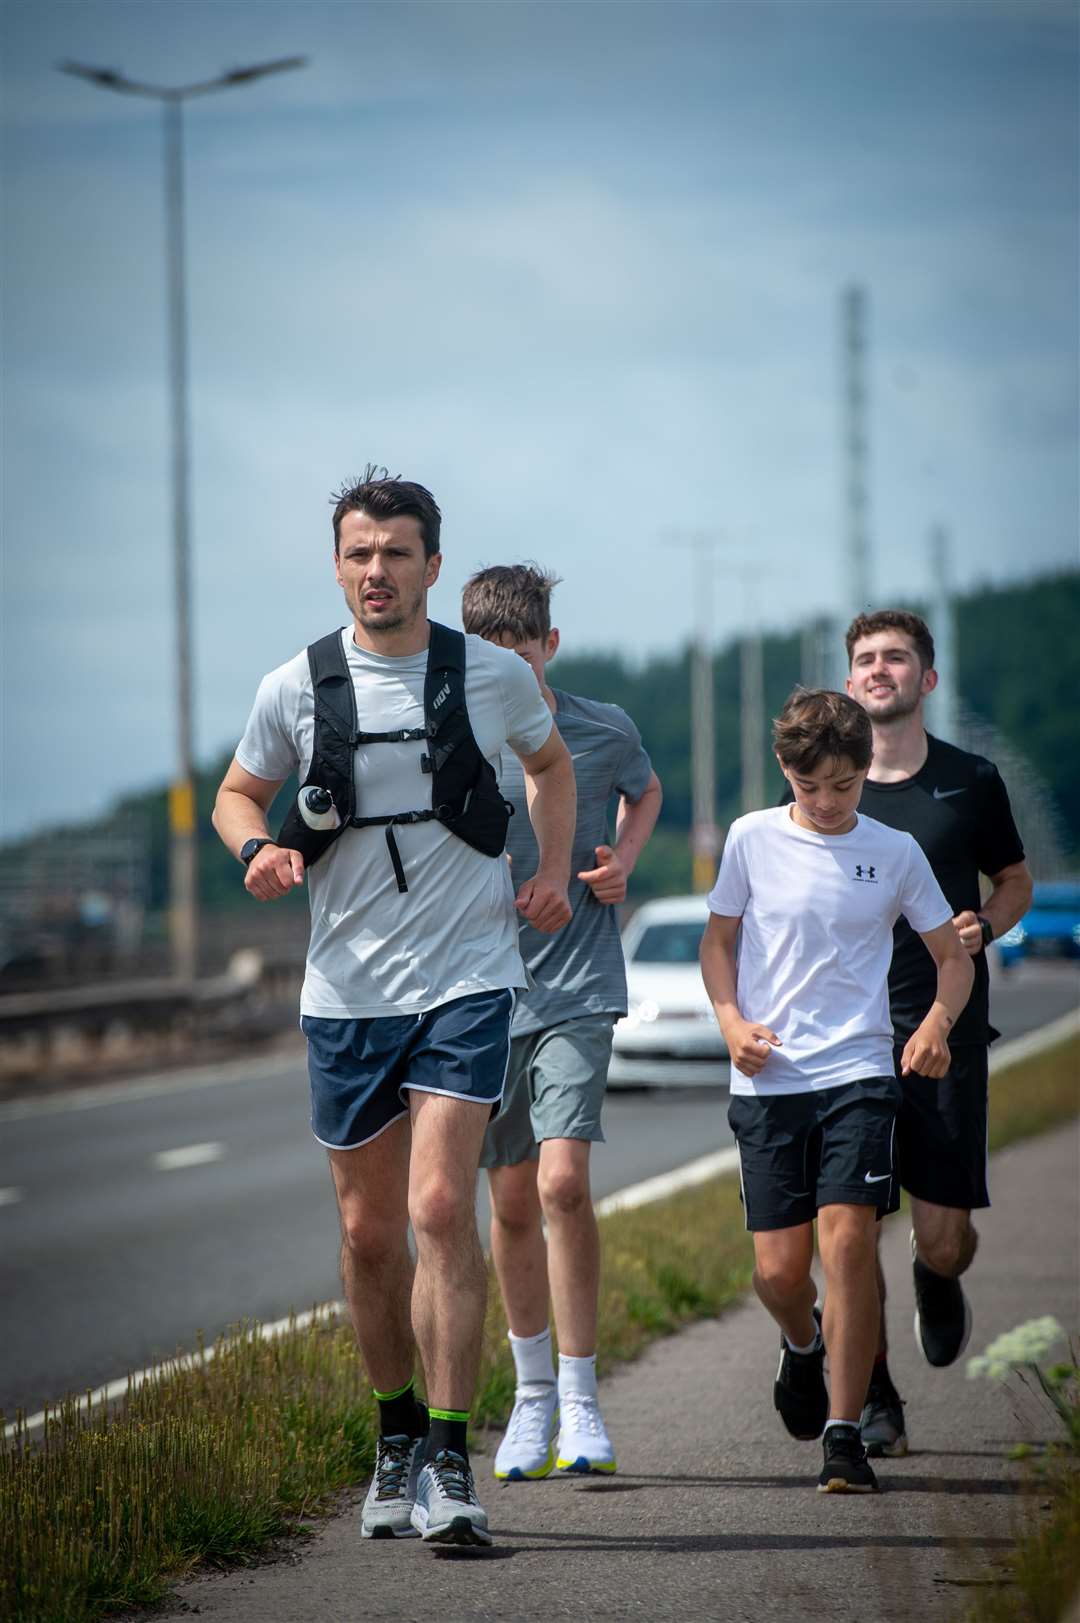 Steven Mackay, 4 marathons in 24 hours for MFR Cash for Kids...Nearly there, on the Kessock Bridge...Picture: Callum Mackay..